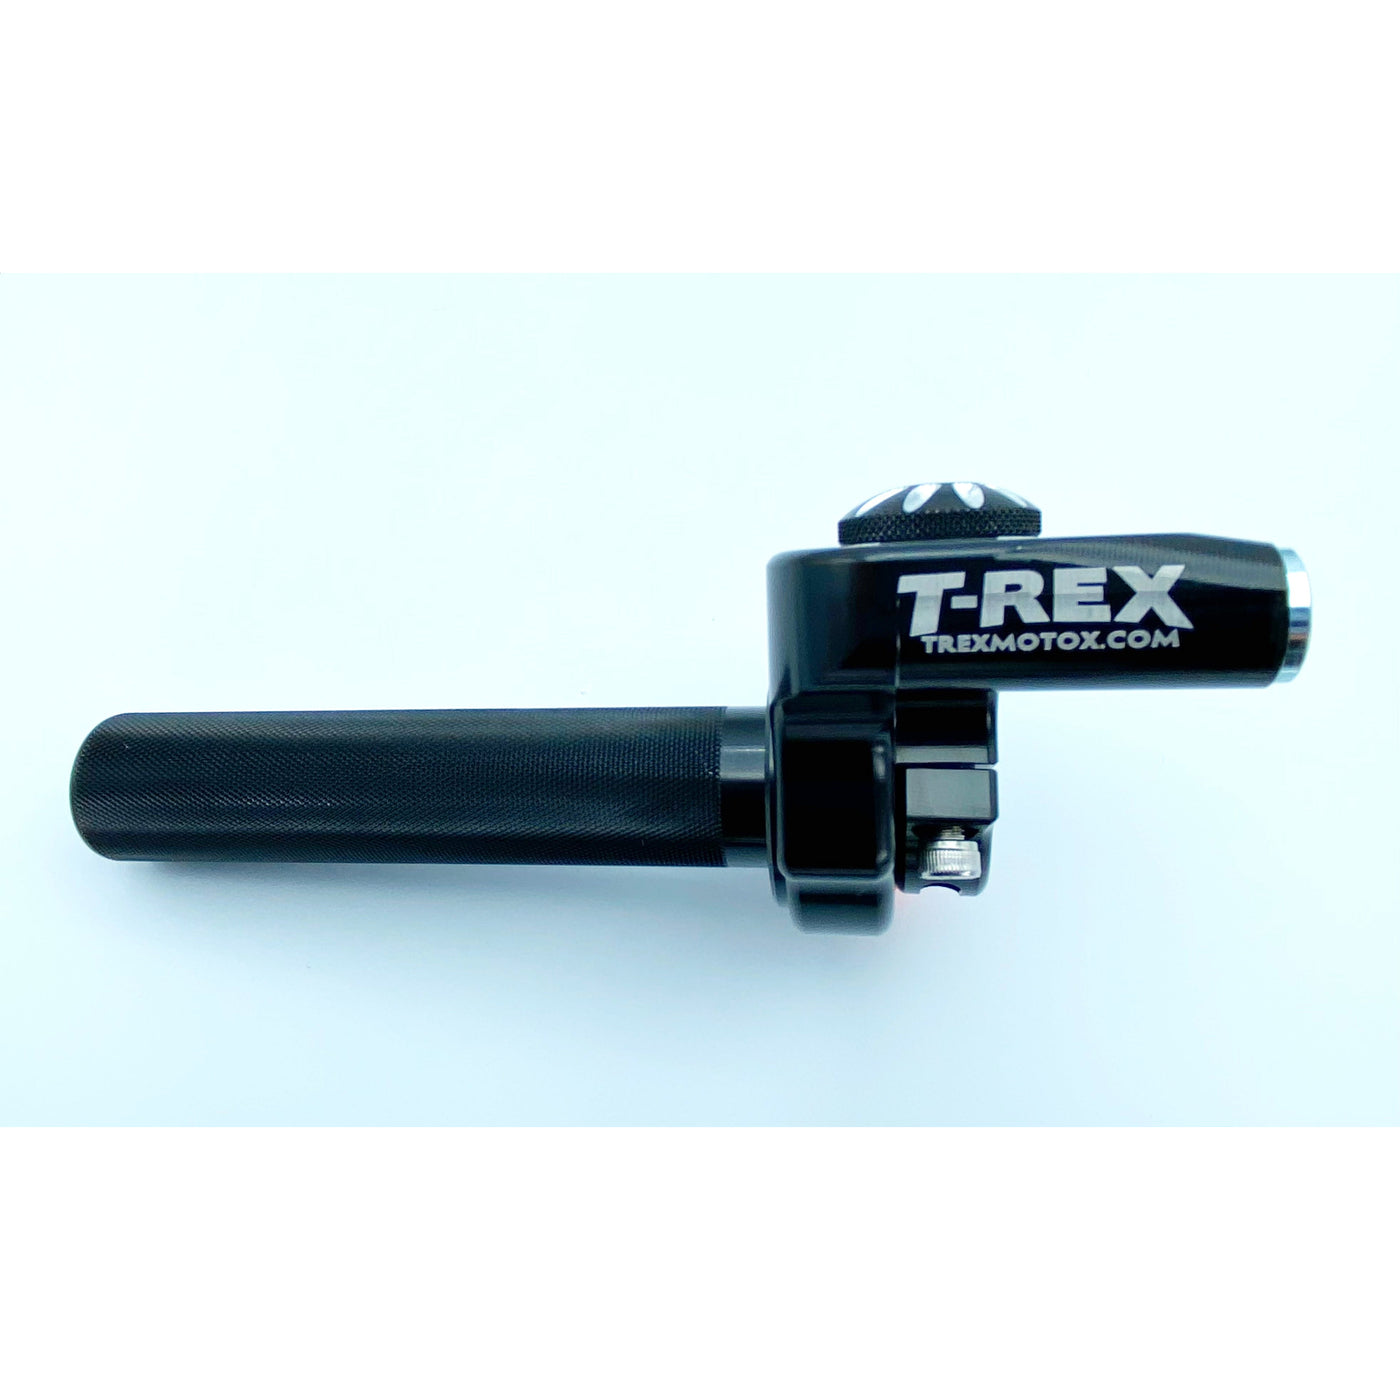 T-Rex Race Spec Billet Throttle for Honda CRF 110 All Years to 2018